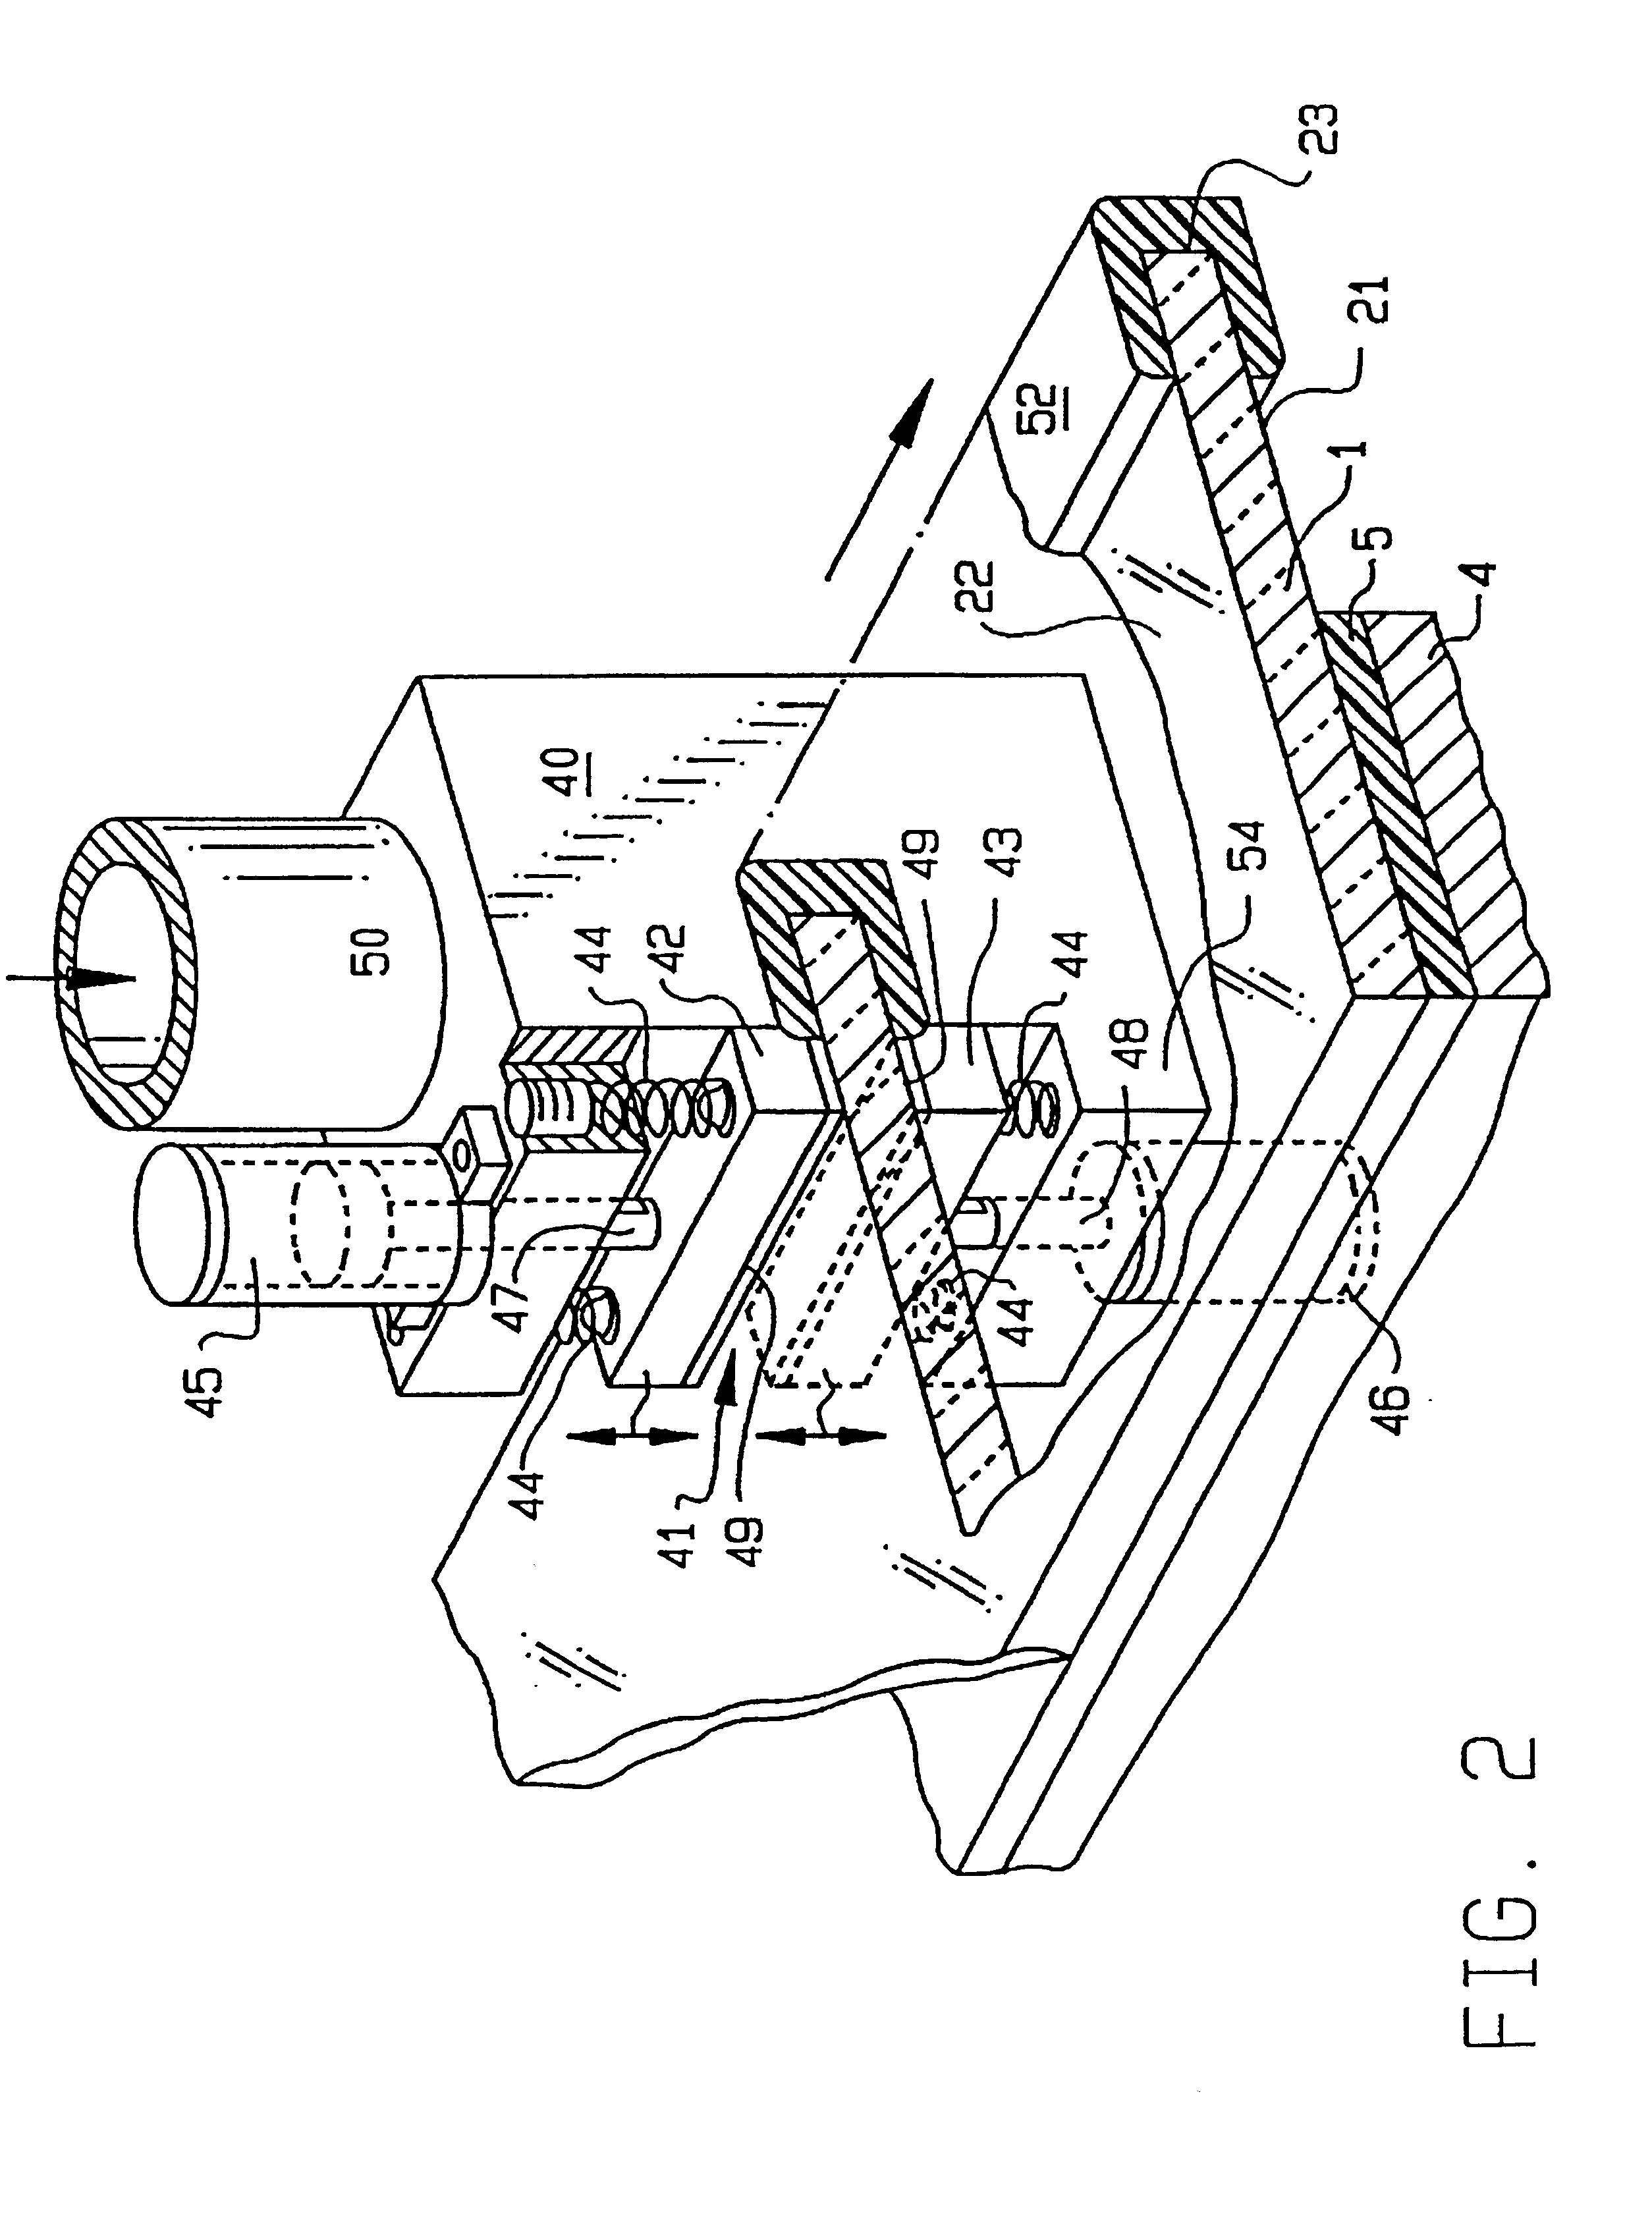 Device for extruding a polymer frame onto a plate-shaped object